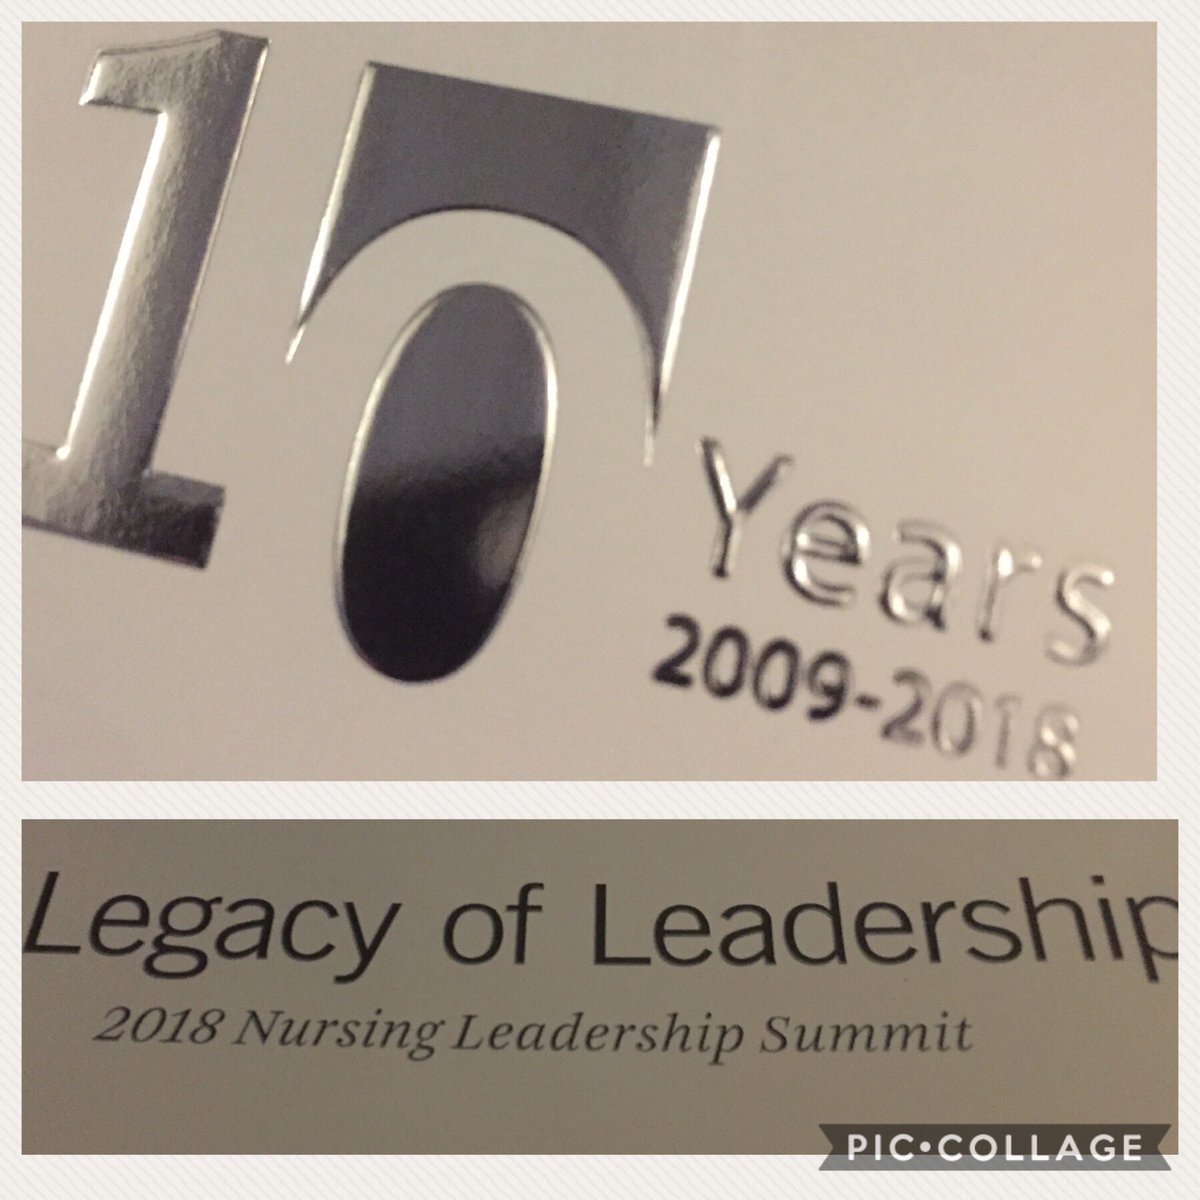 Humbled, inspired, and grateful to be a @ClevelandClinic #healthynurse #LegacyOfLeadership